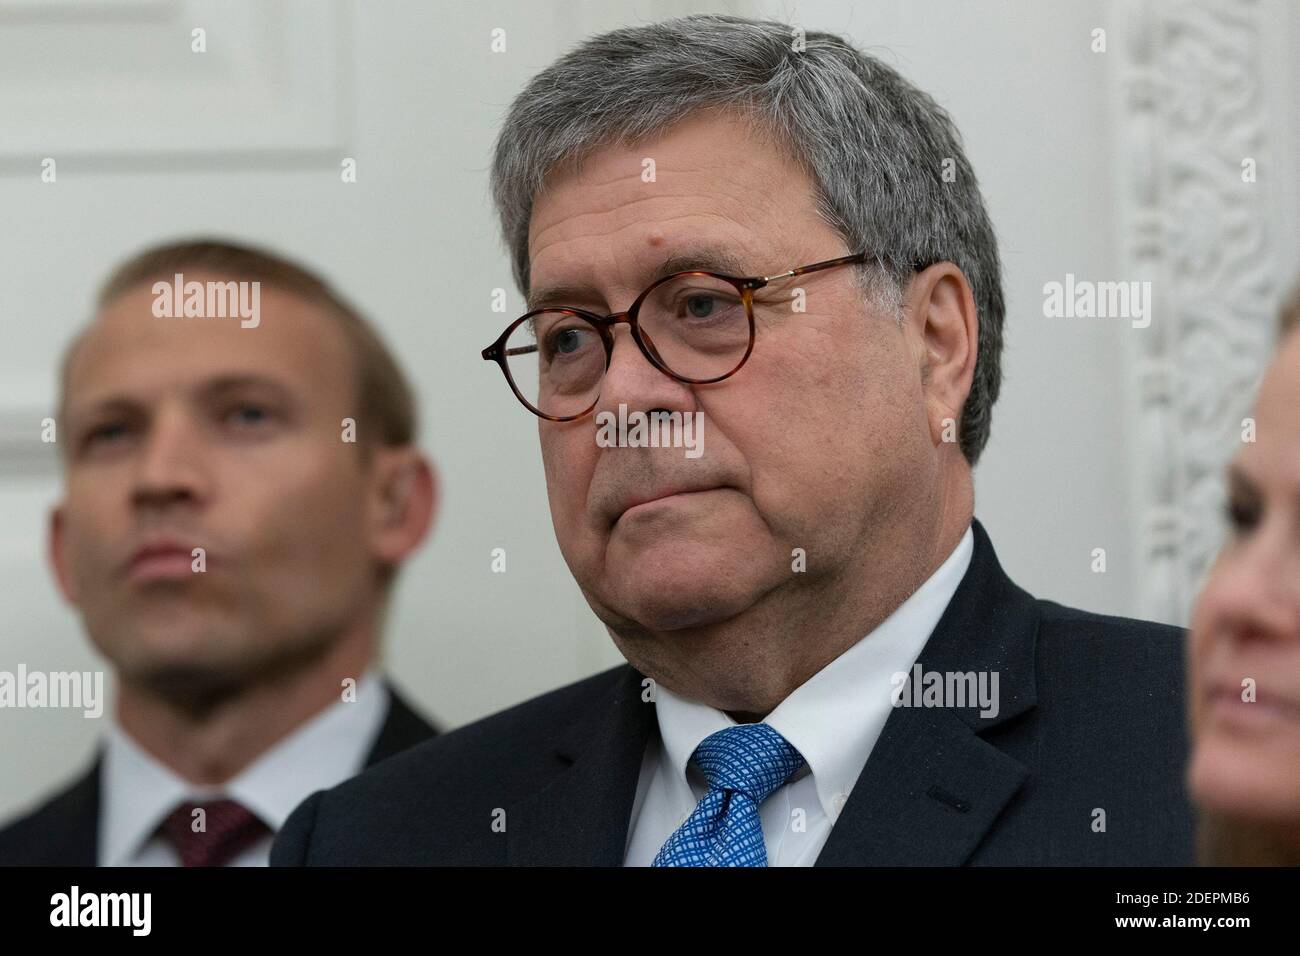 United States Attorney General William P. Barr listens as United States President Donald J. Trump presents the Presidential Medal of Freedom to Edwin Meese at the White House in Washington, DC, USA, October 8, 2019. Photo by Chris Kleponis/Pool via CNP/ABACAPRESS.COM Stock Photo